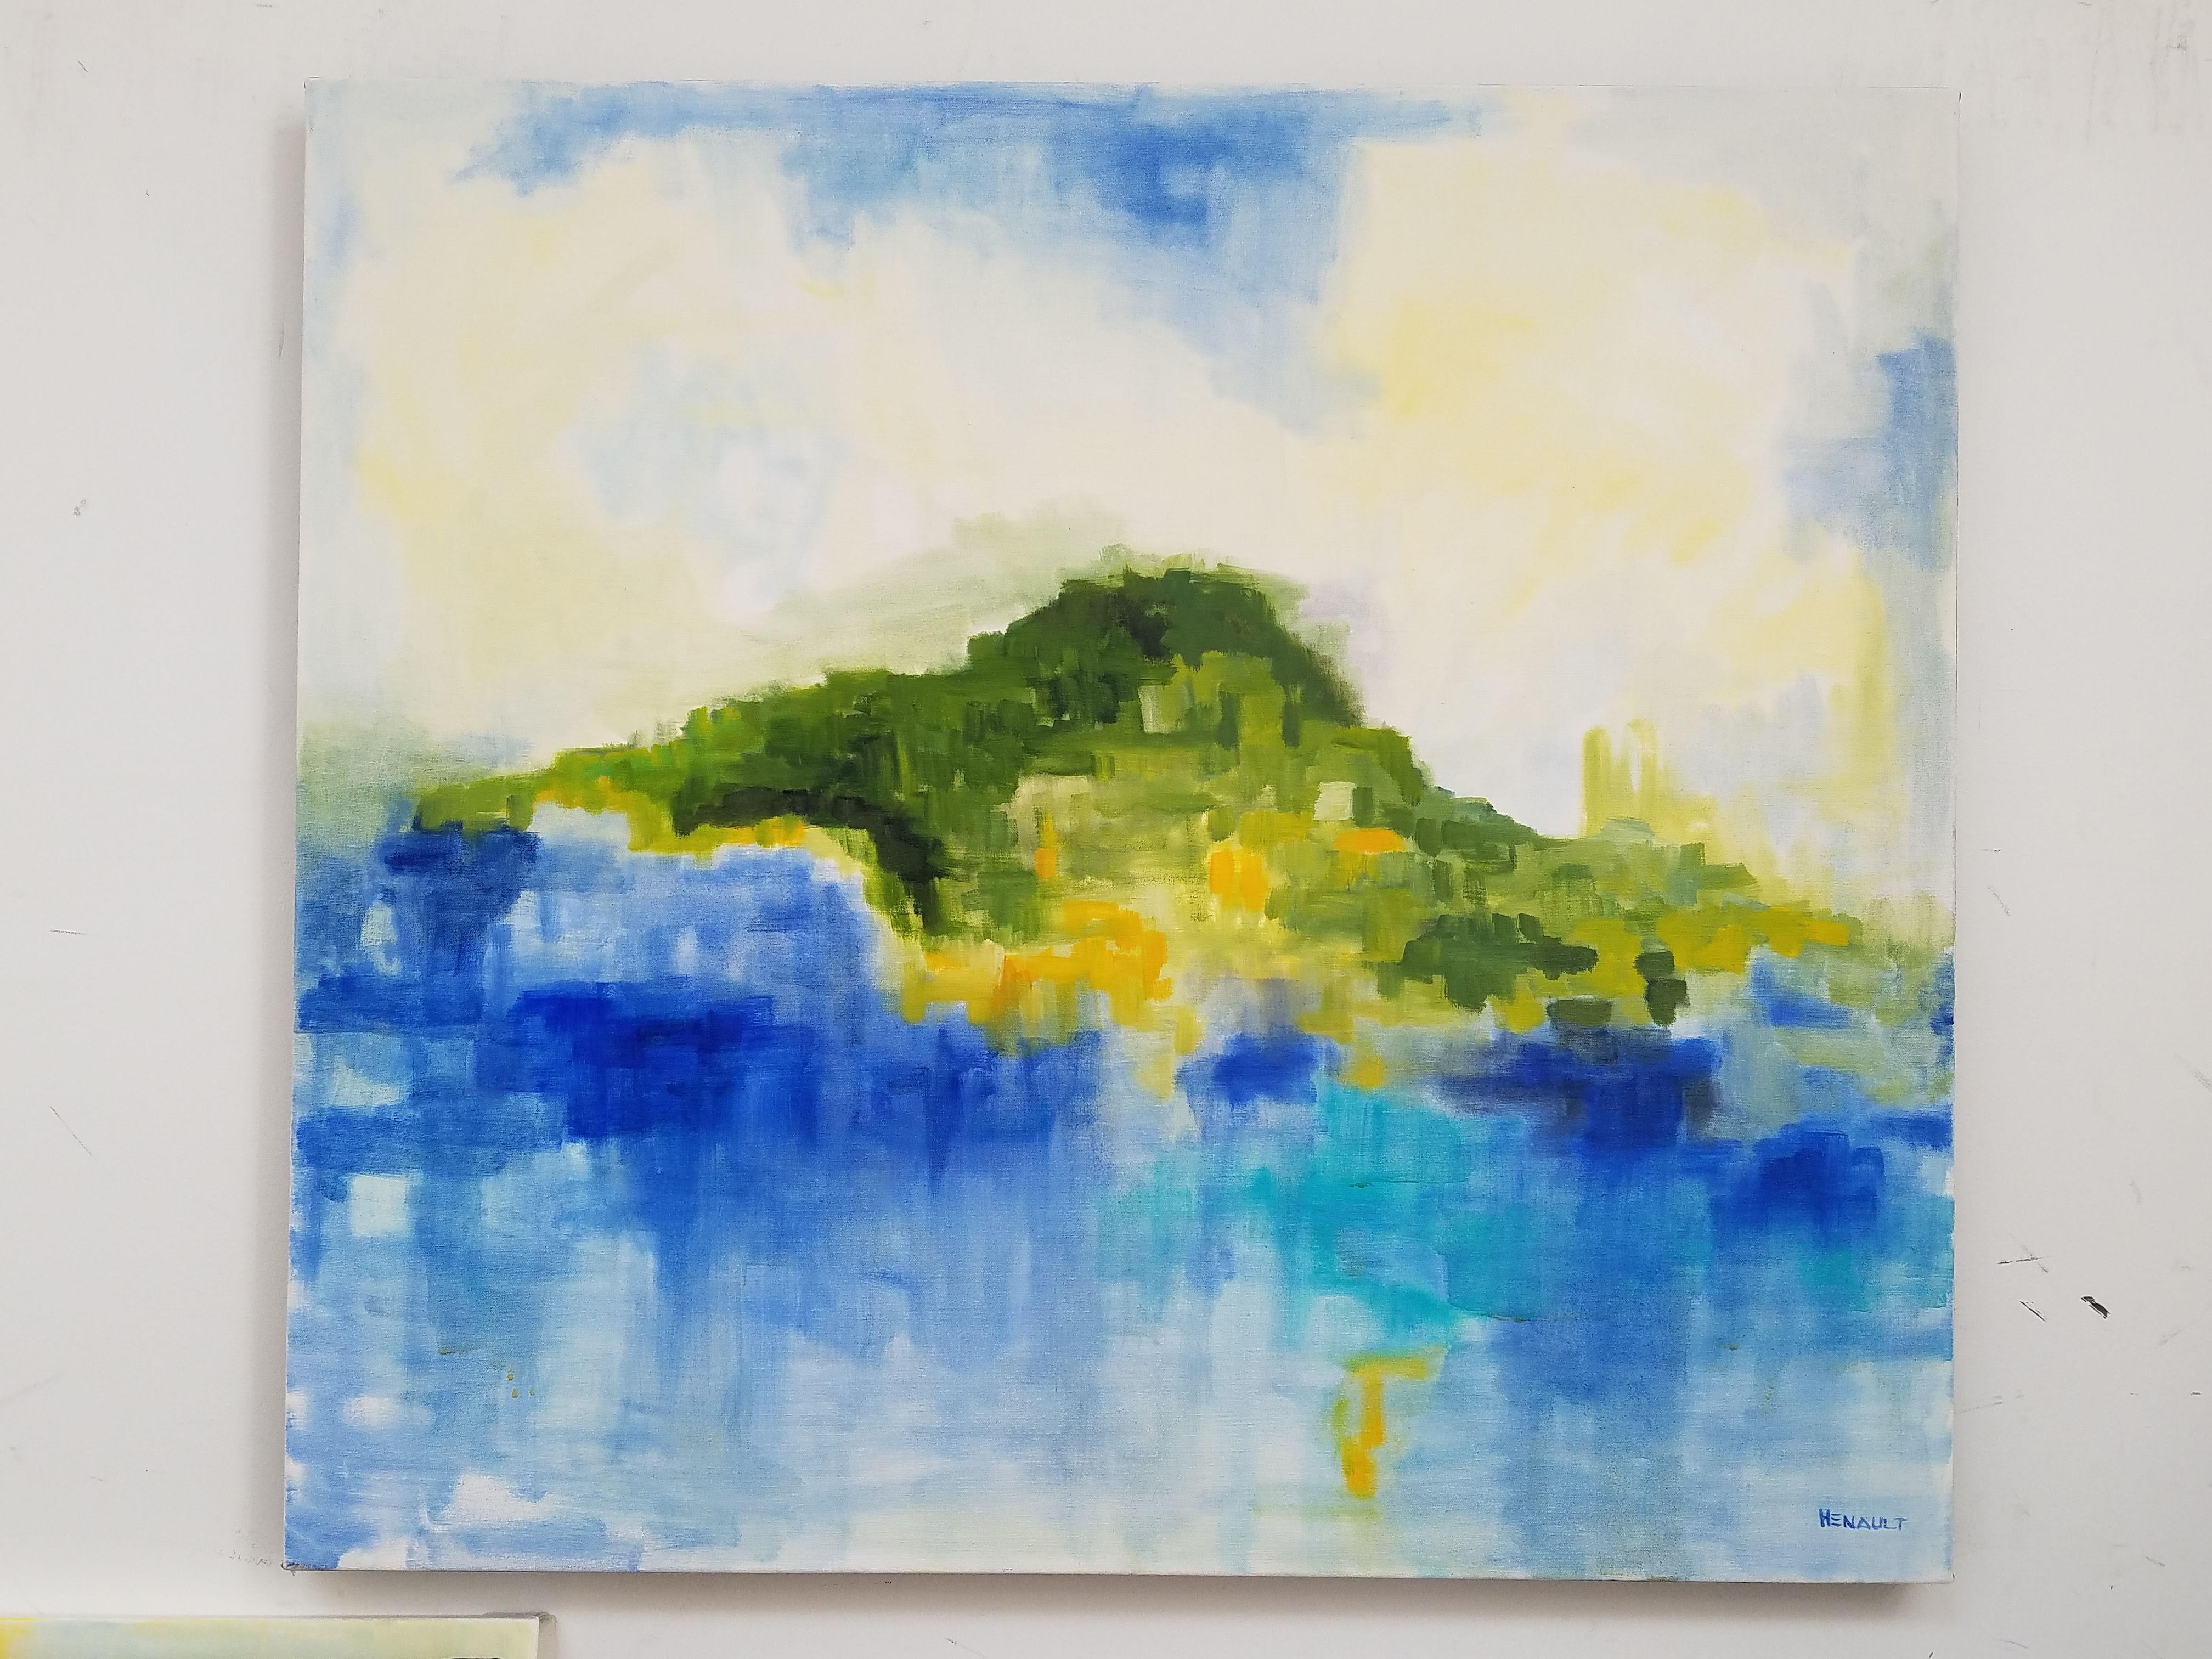 Modern abstract, oil on canvas painting, titled “Mont/The Mountain” by Michelle Hénault, a conceptual fine artist. Signed on front bottom right, also, signed, dated and titled on back; measuring approximate 36